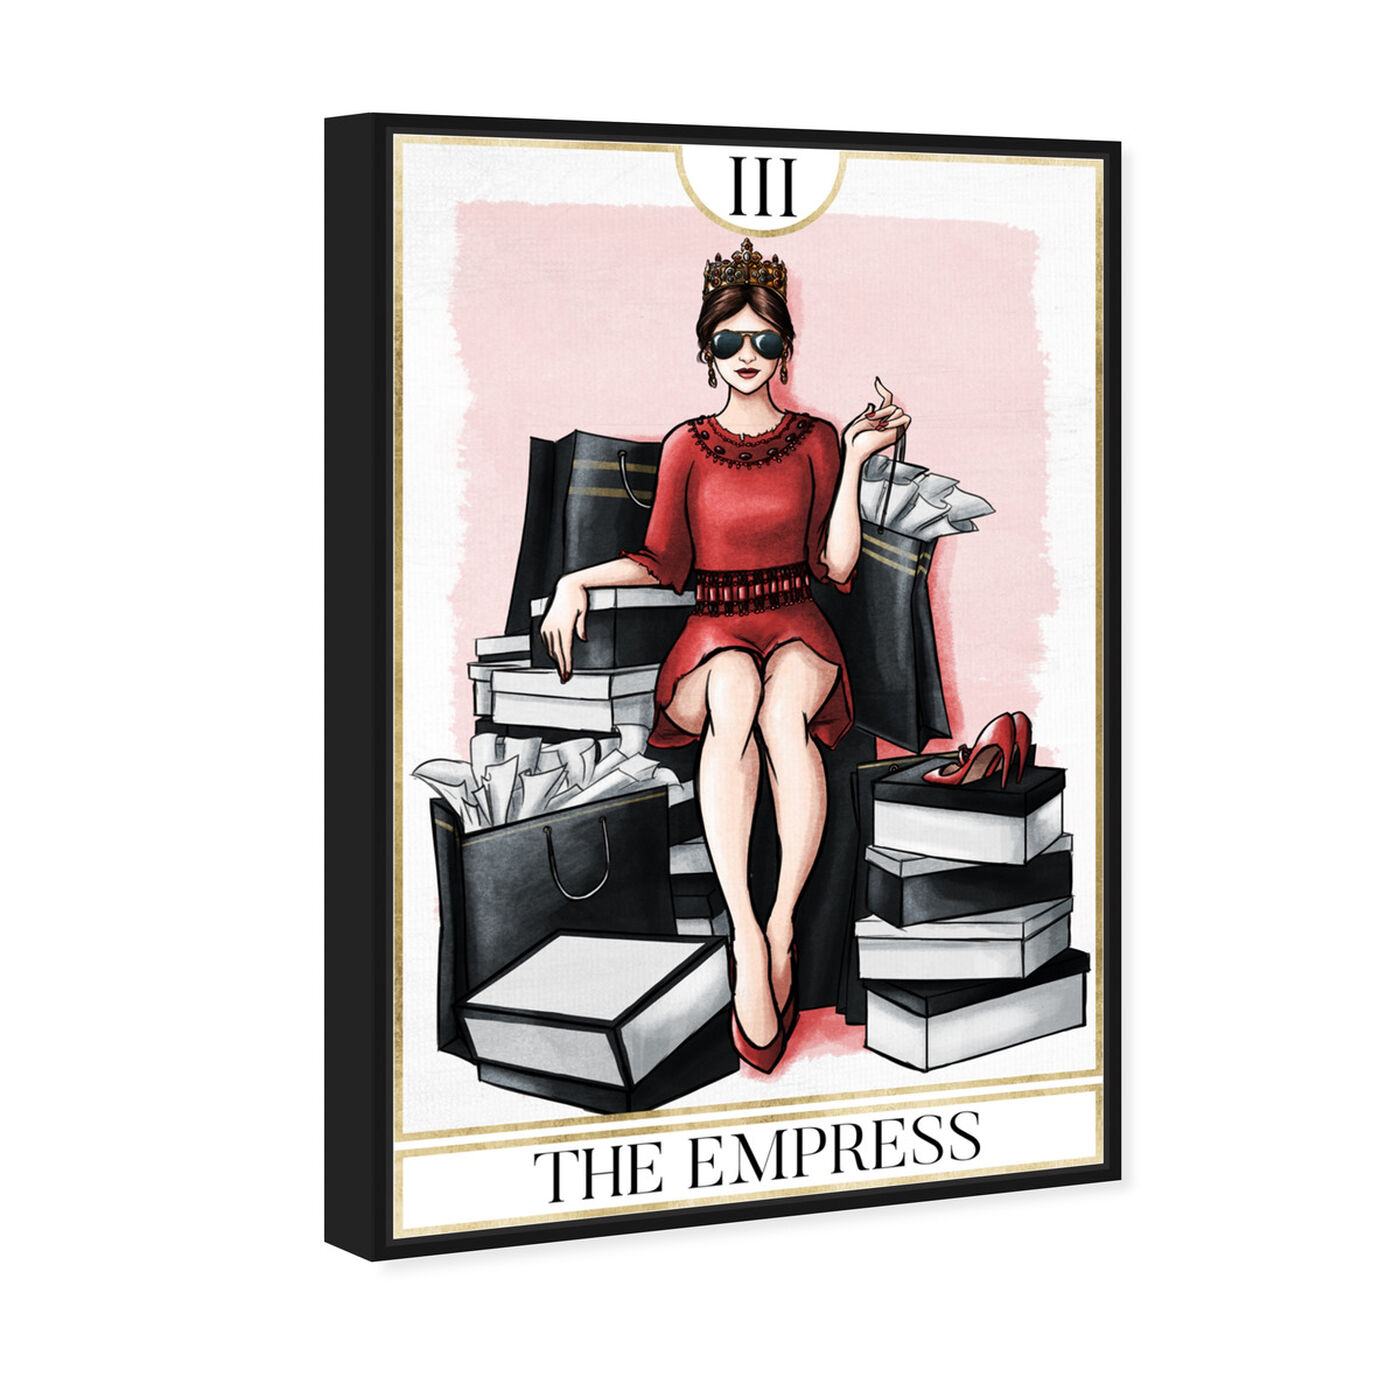 Angled view of The Empress featuring fashion and glam and dress art.